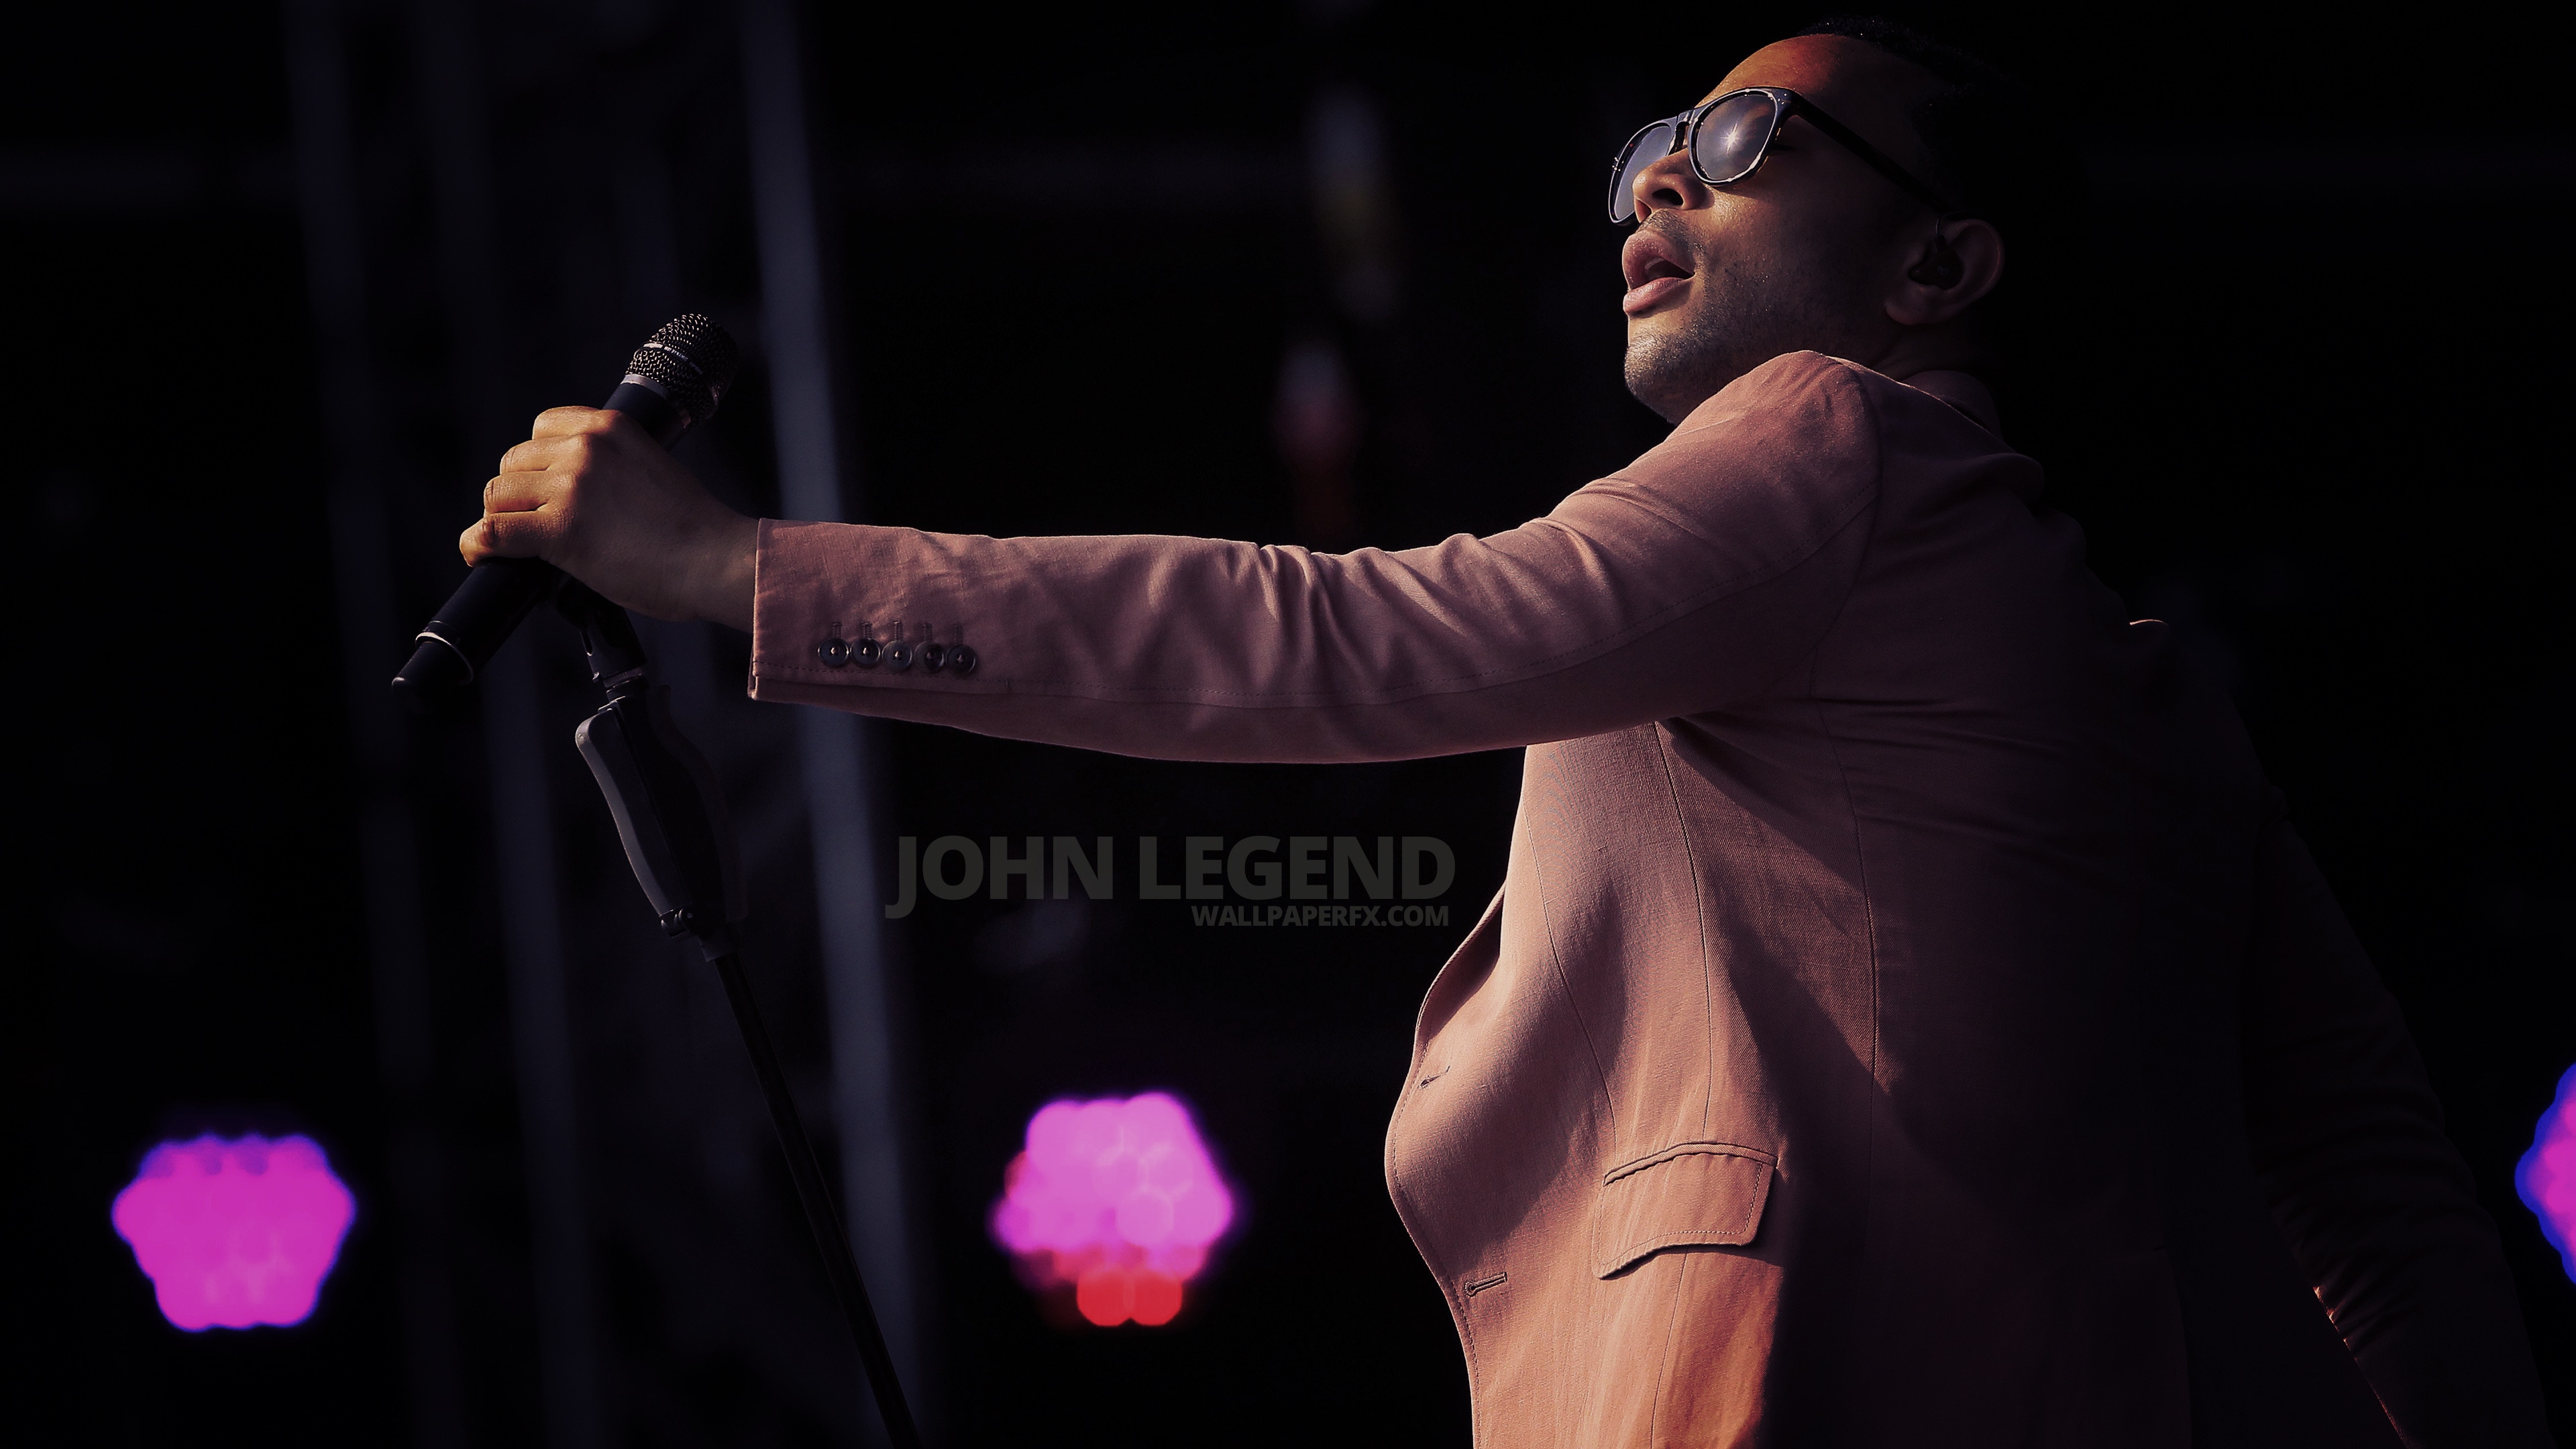 John Legend on Stage for 3840 x 2160 Ultra HD resolution